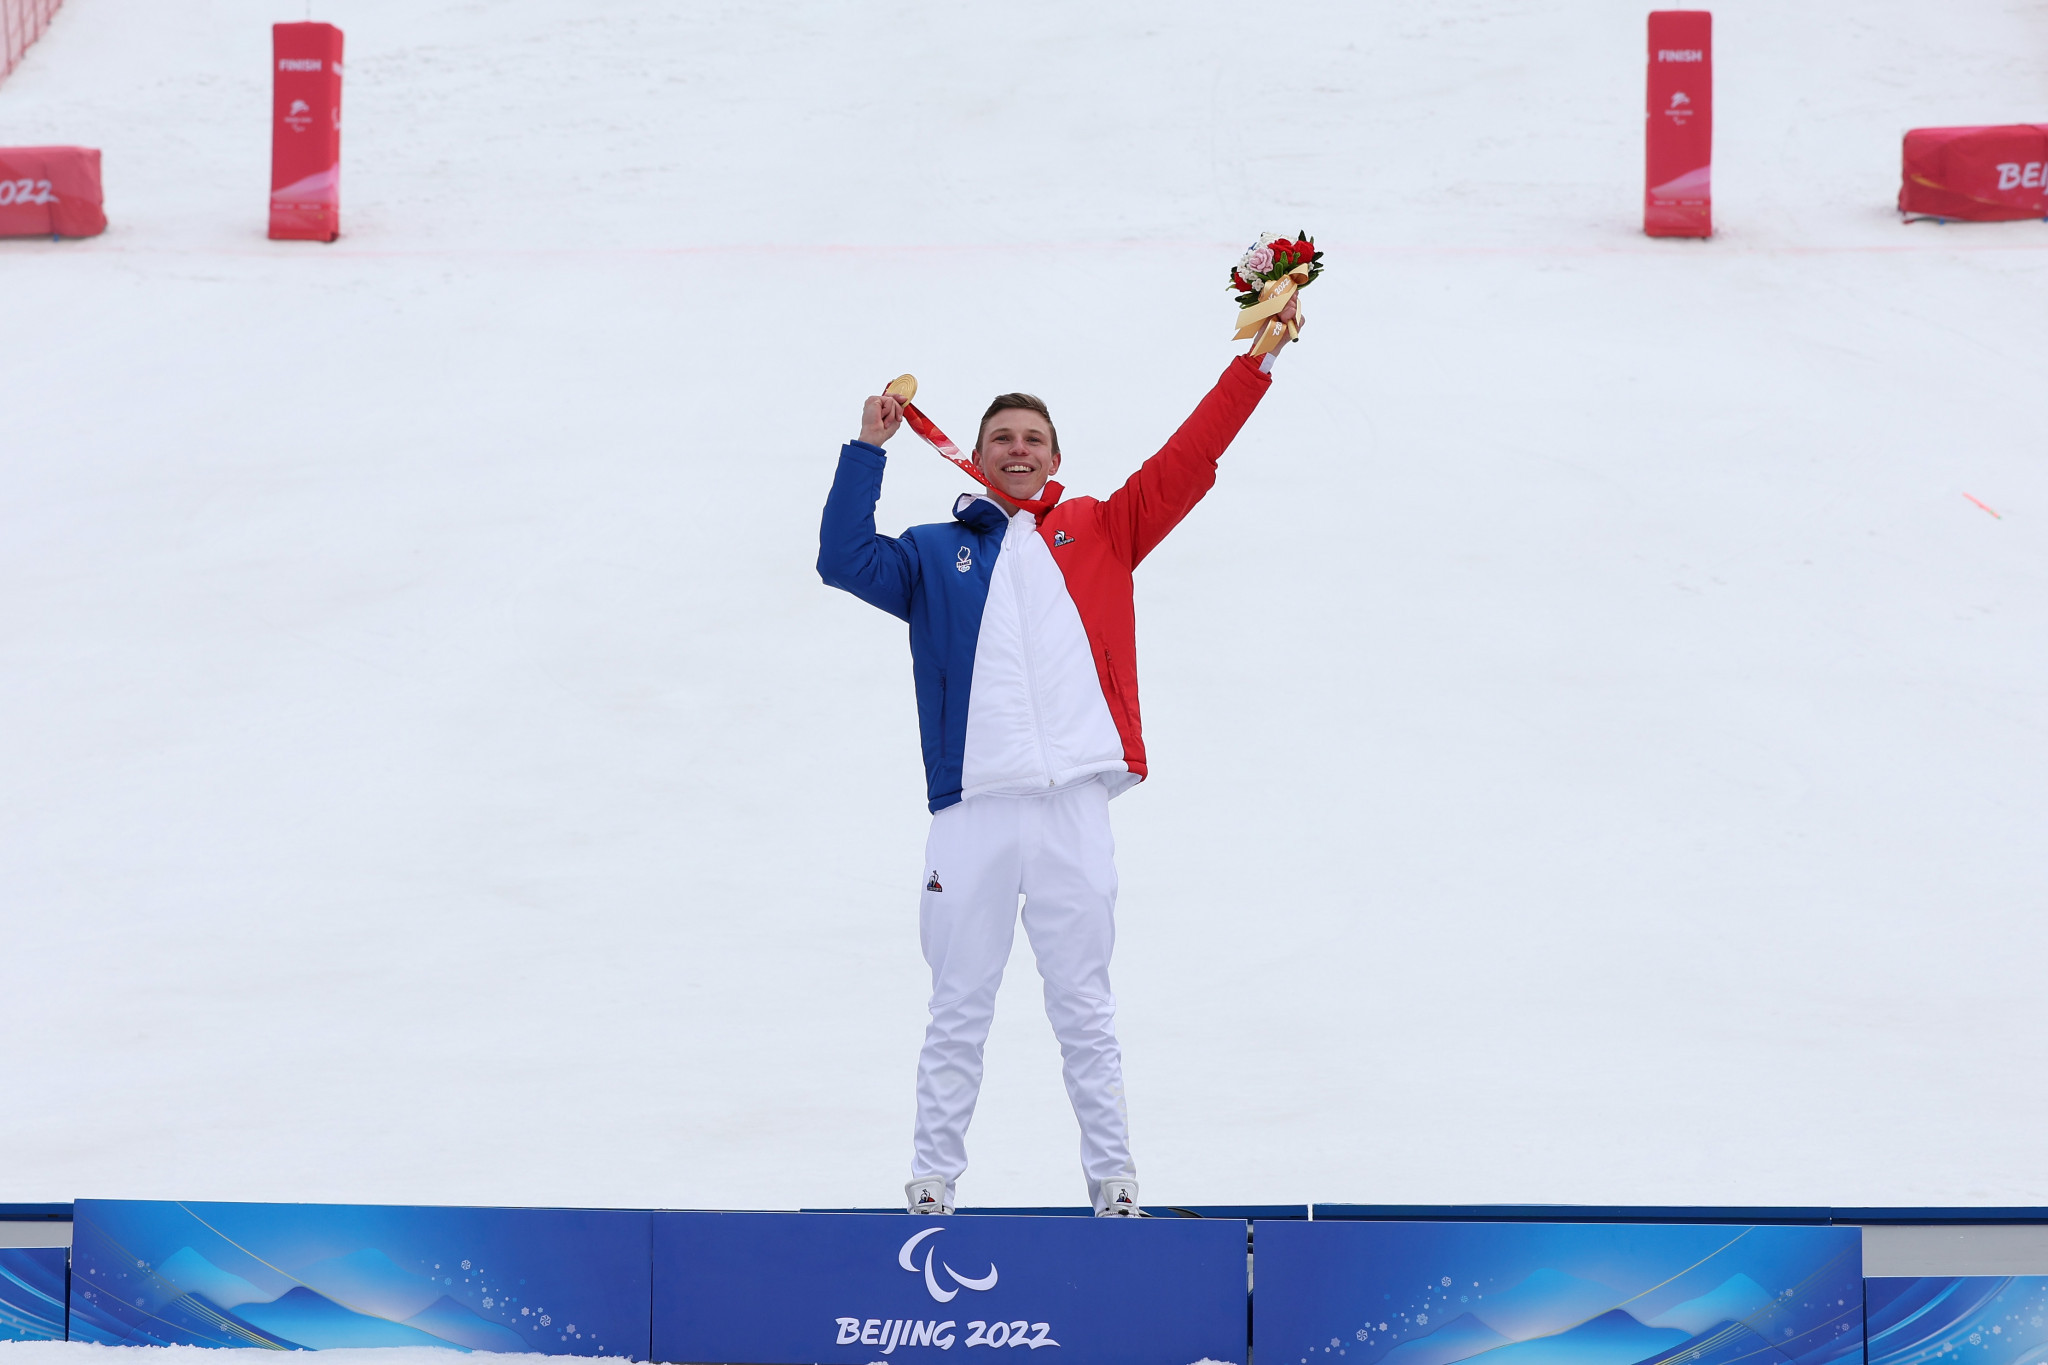 France's Arthur Bauchet won three golds and a bronze at Beijing 2022 after topping the Alpine skiing men's slalom standing event ©Getty Images